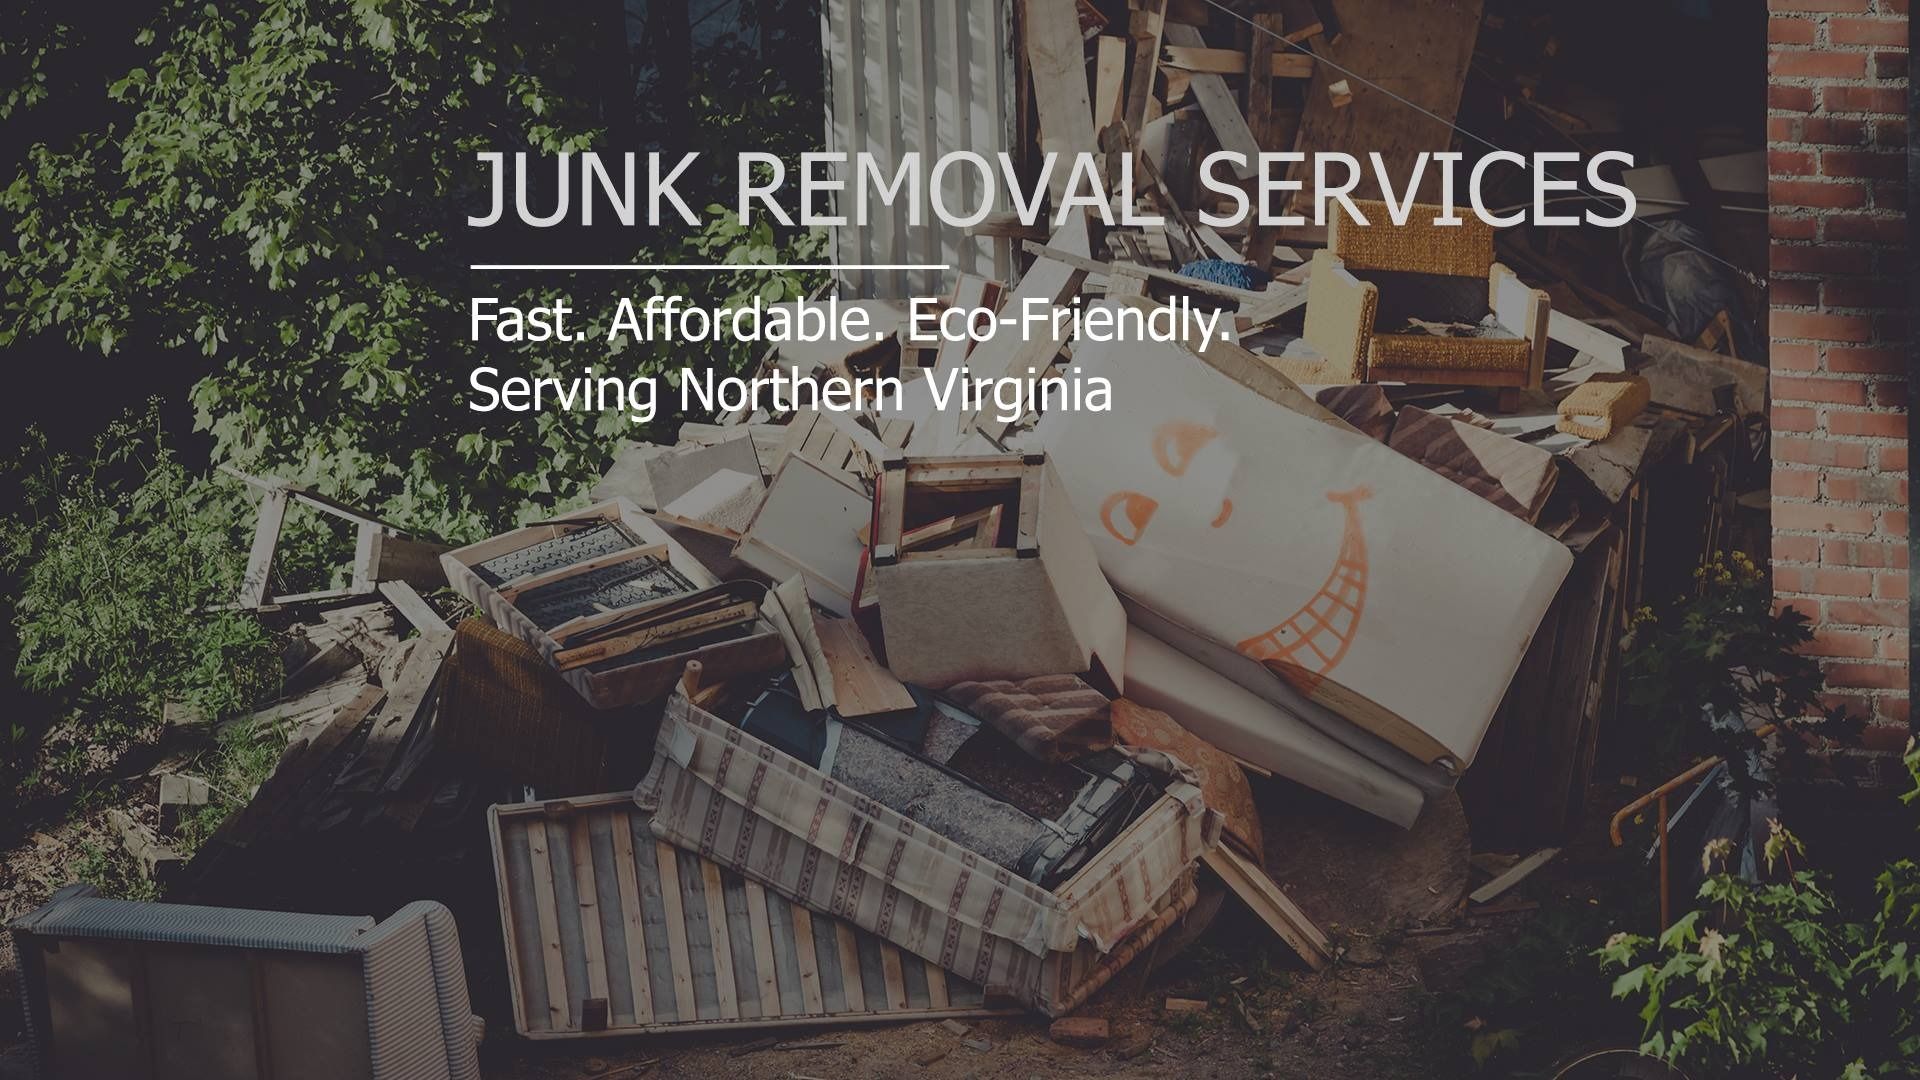 We Junk It Cover Image